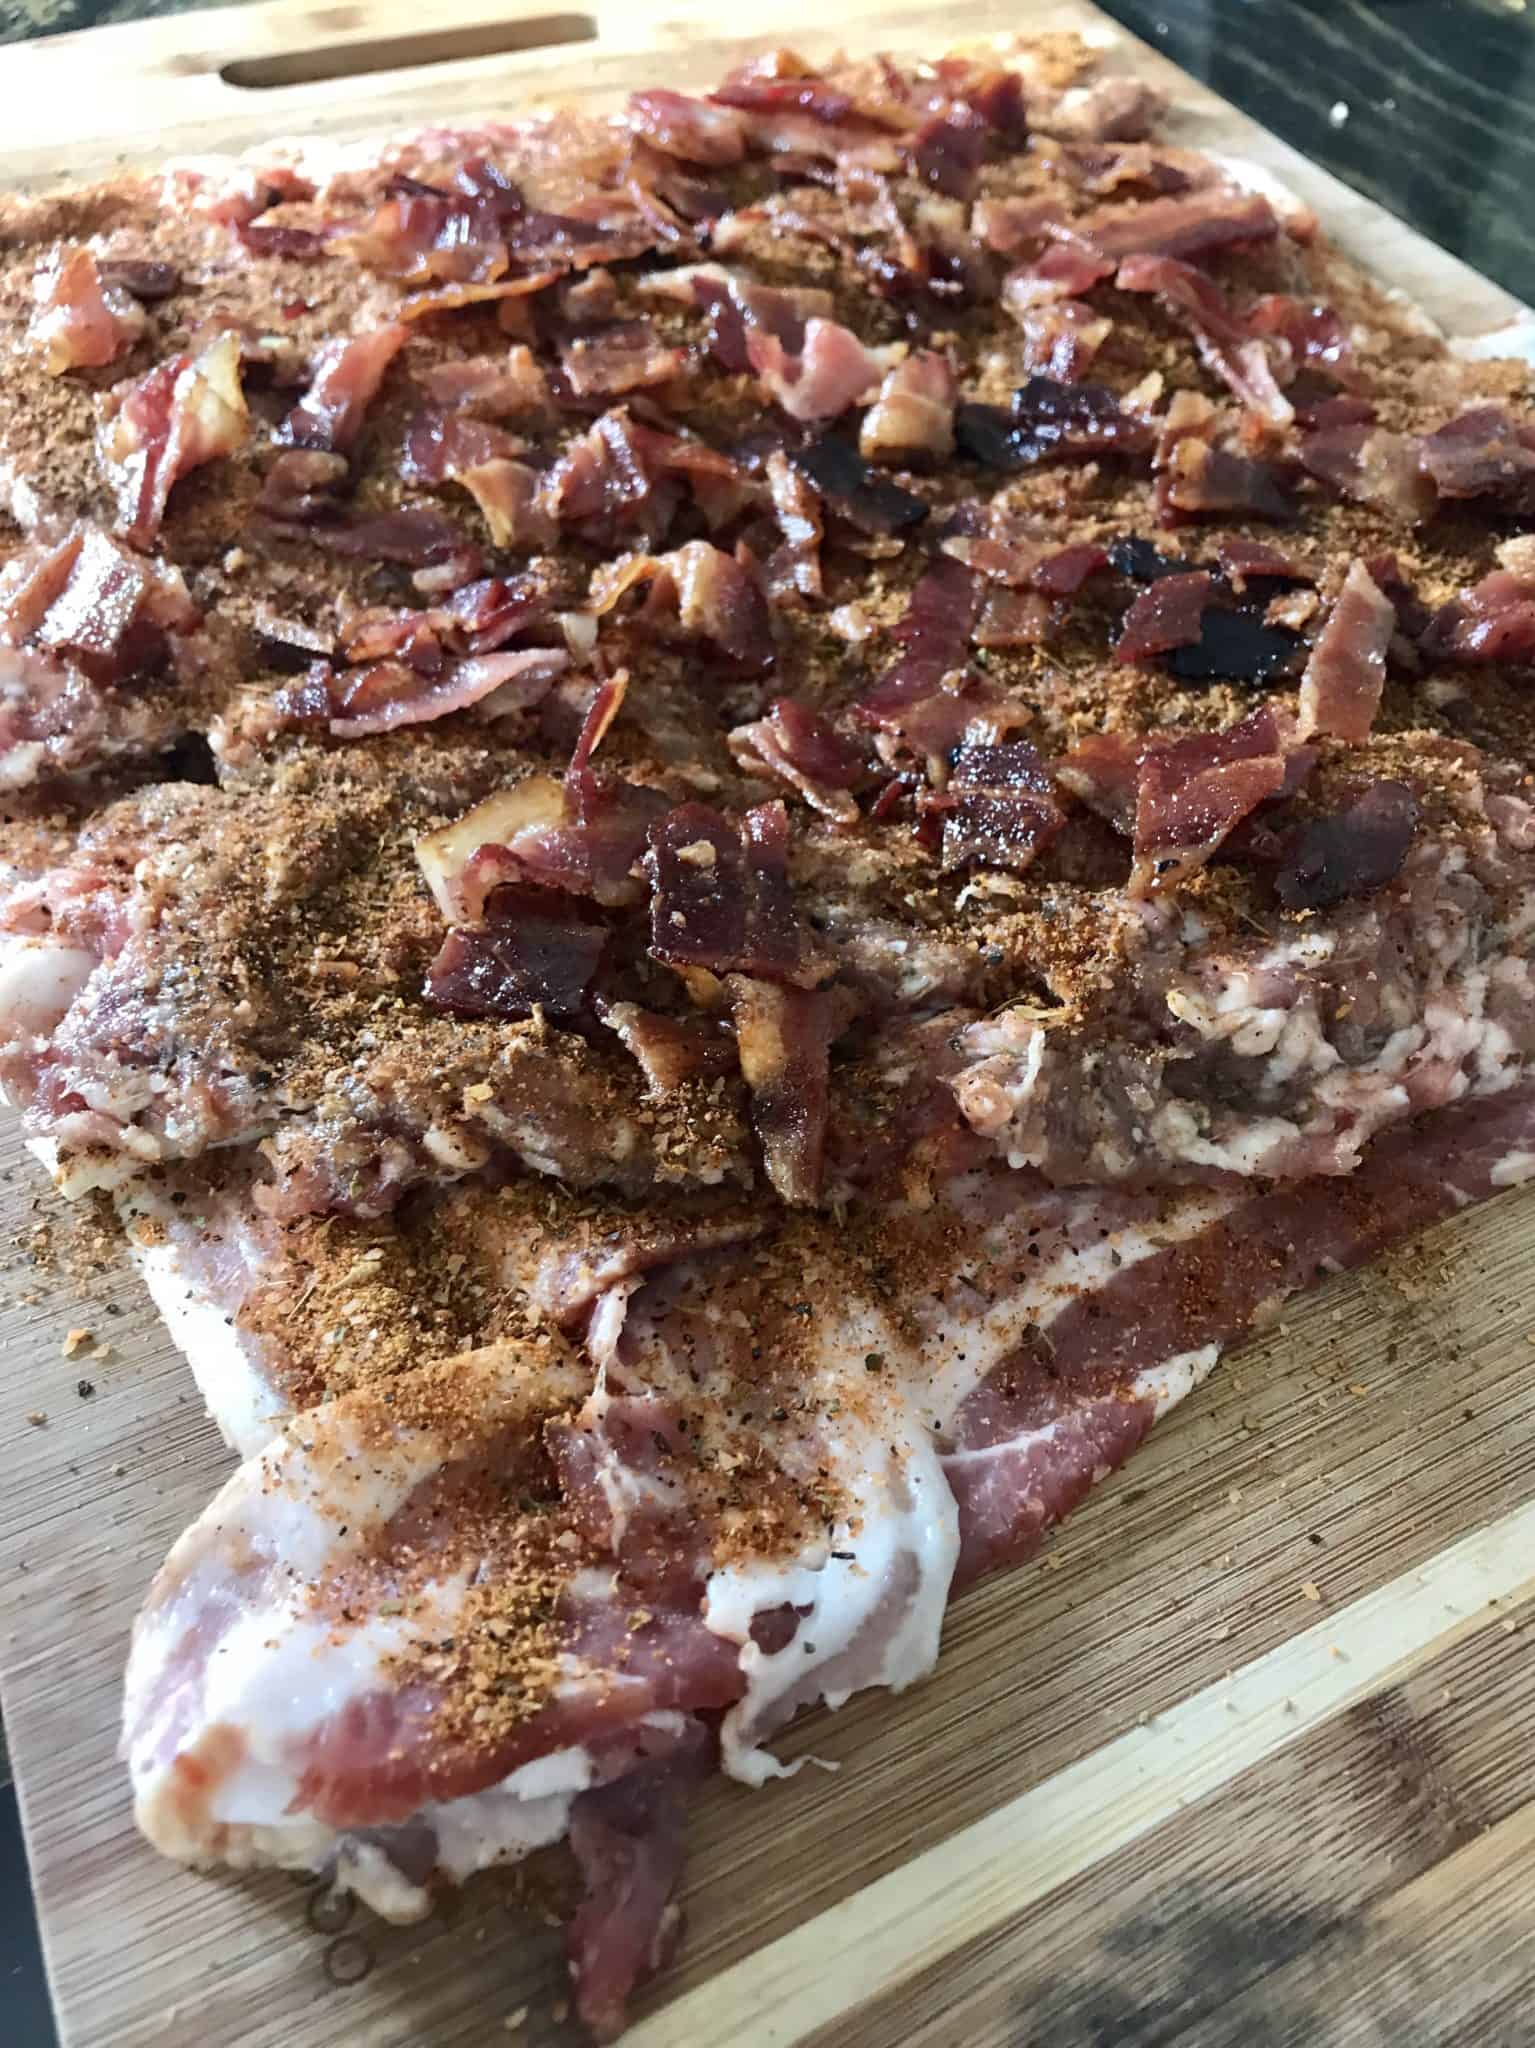 Bacon weave topped with all ingredients on wooden cutting board side view